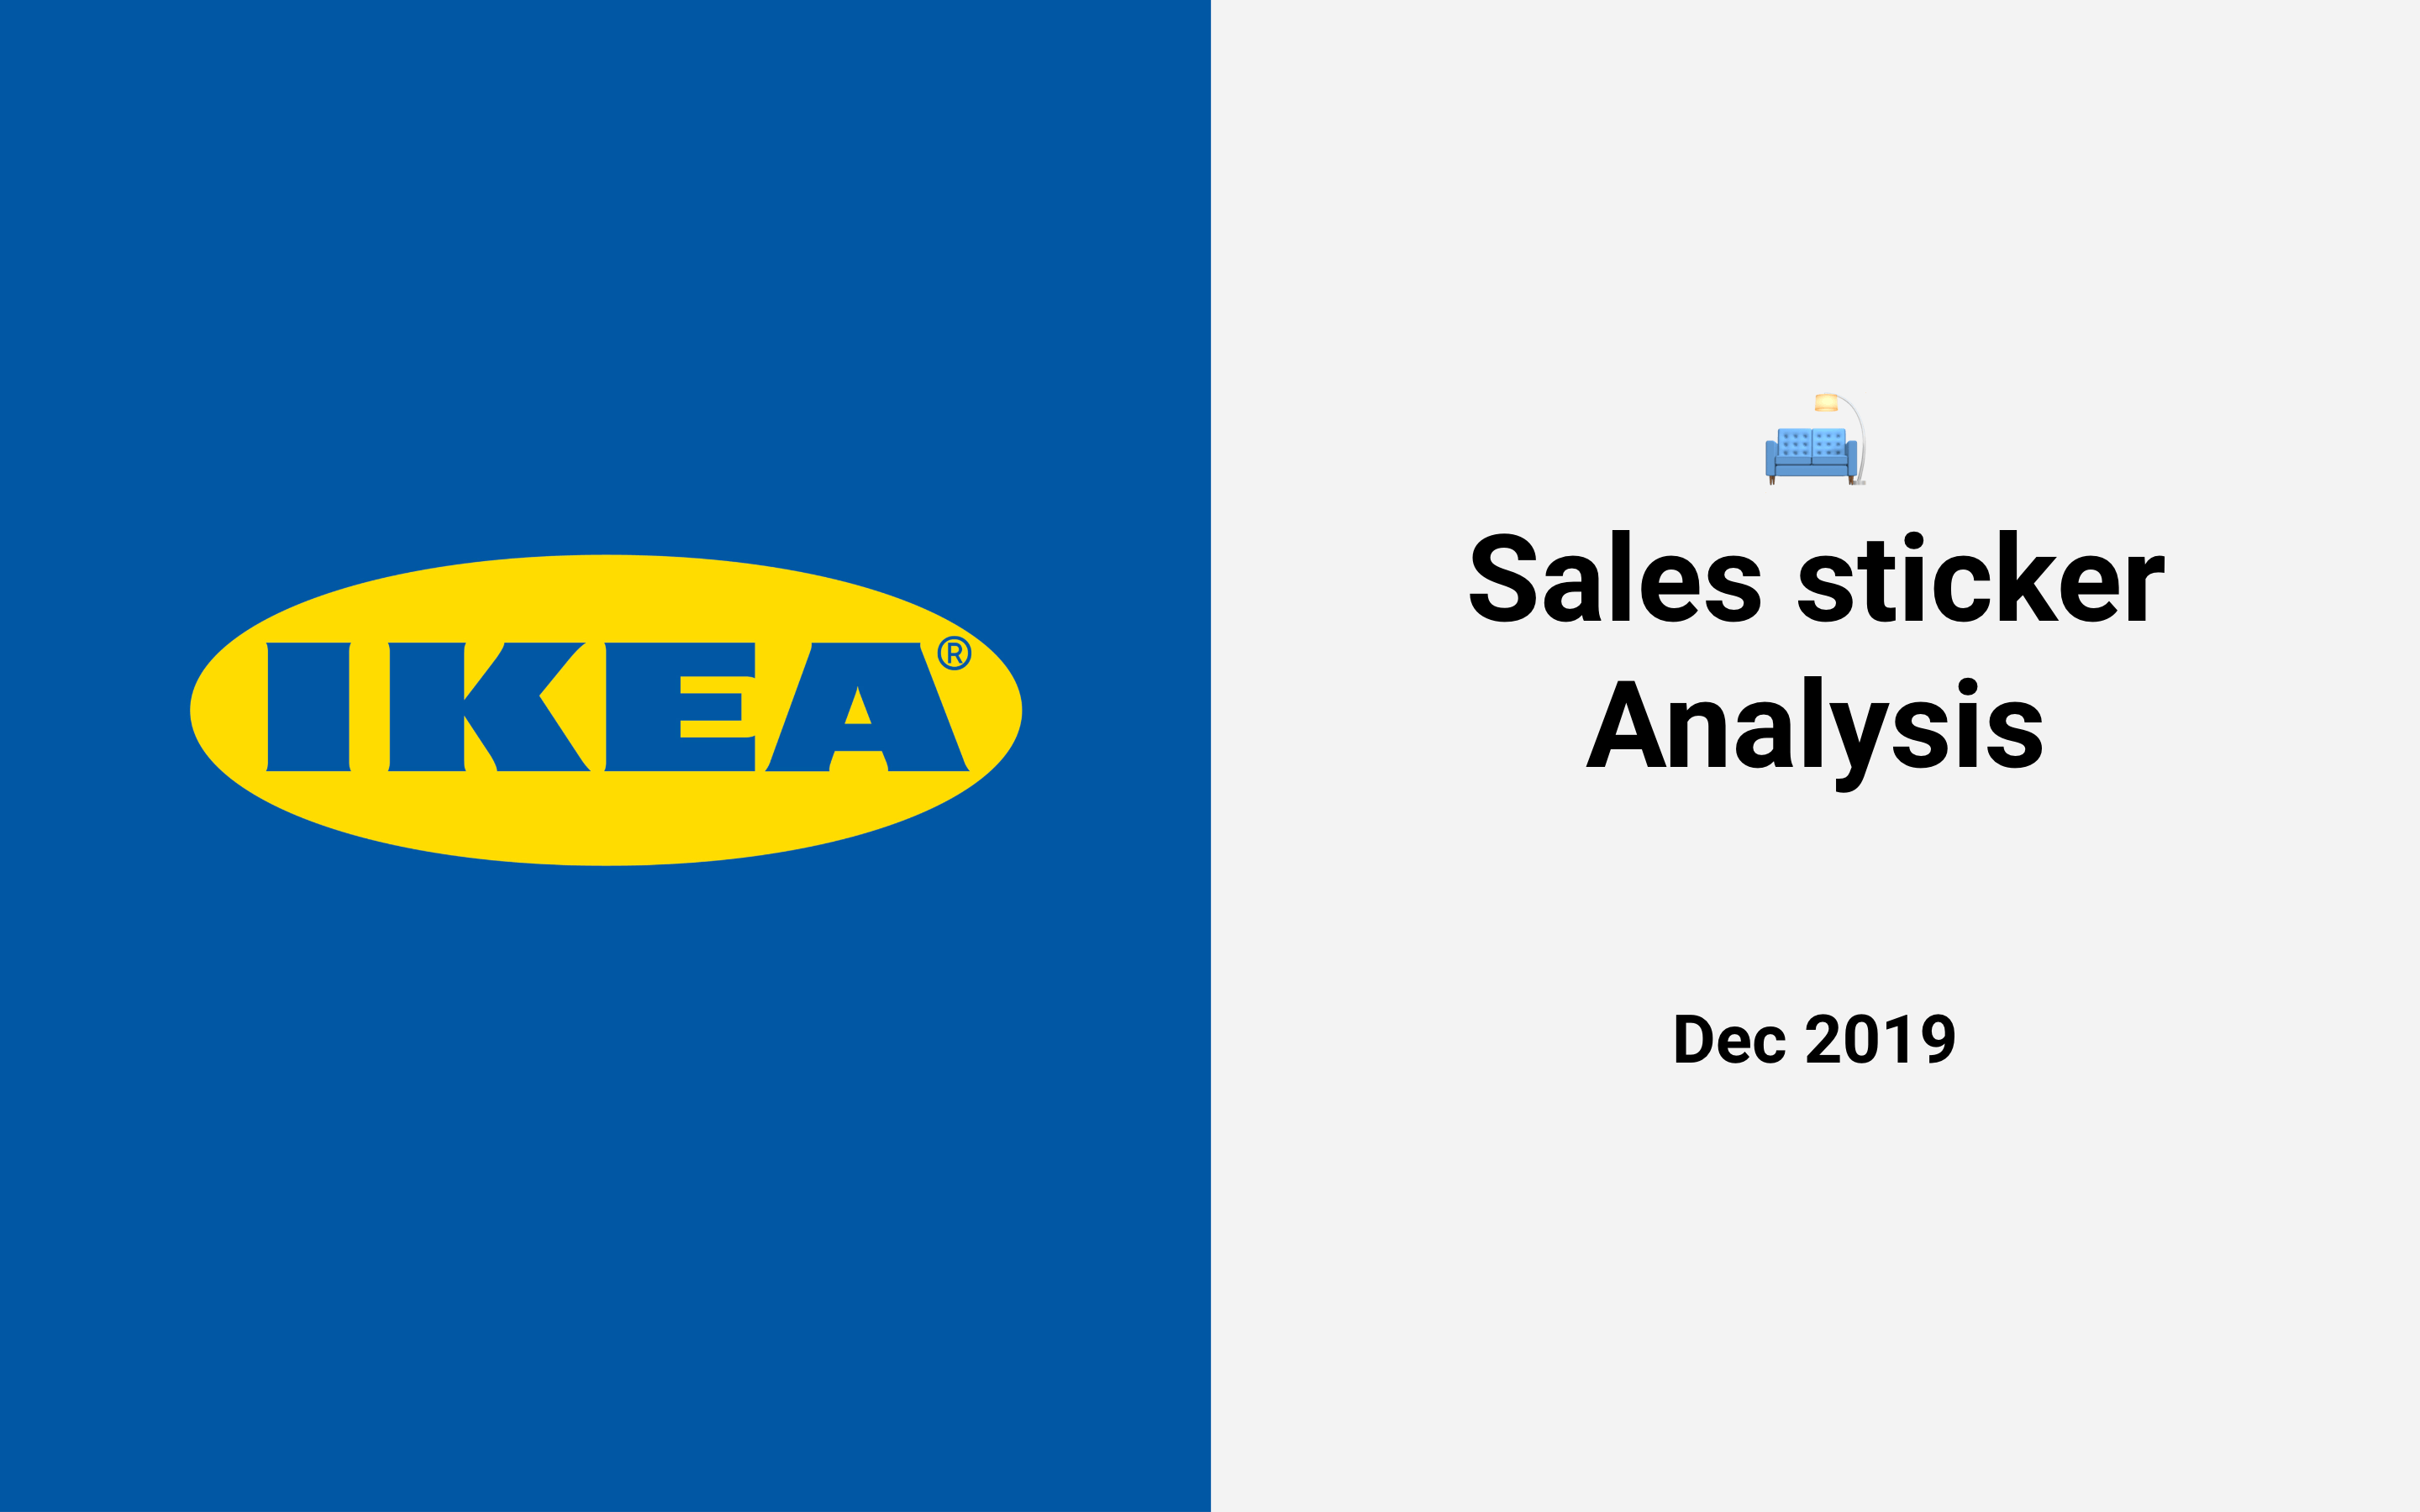 How does IKEA use sales stickers?